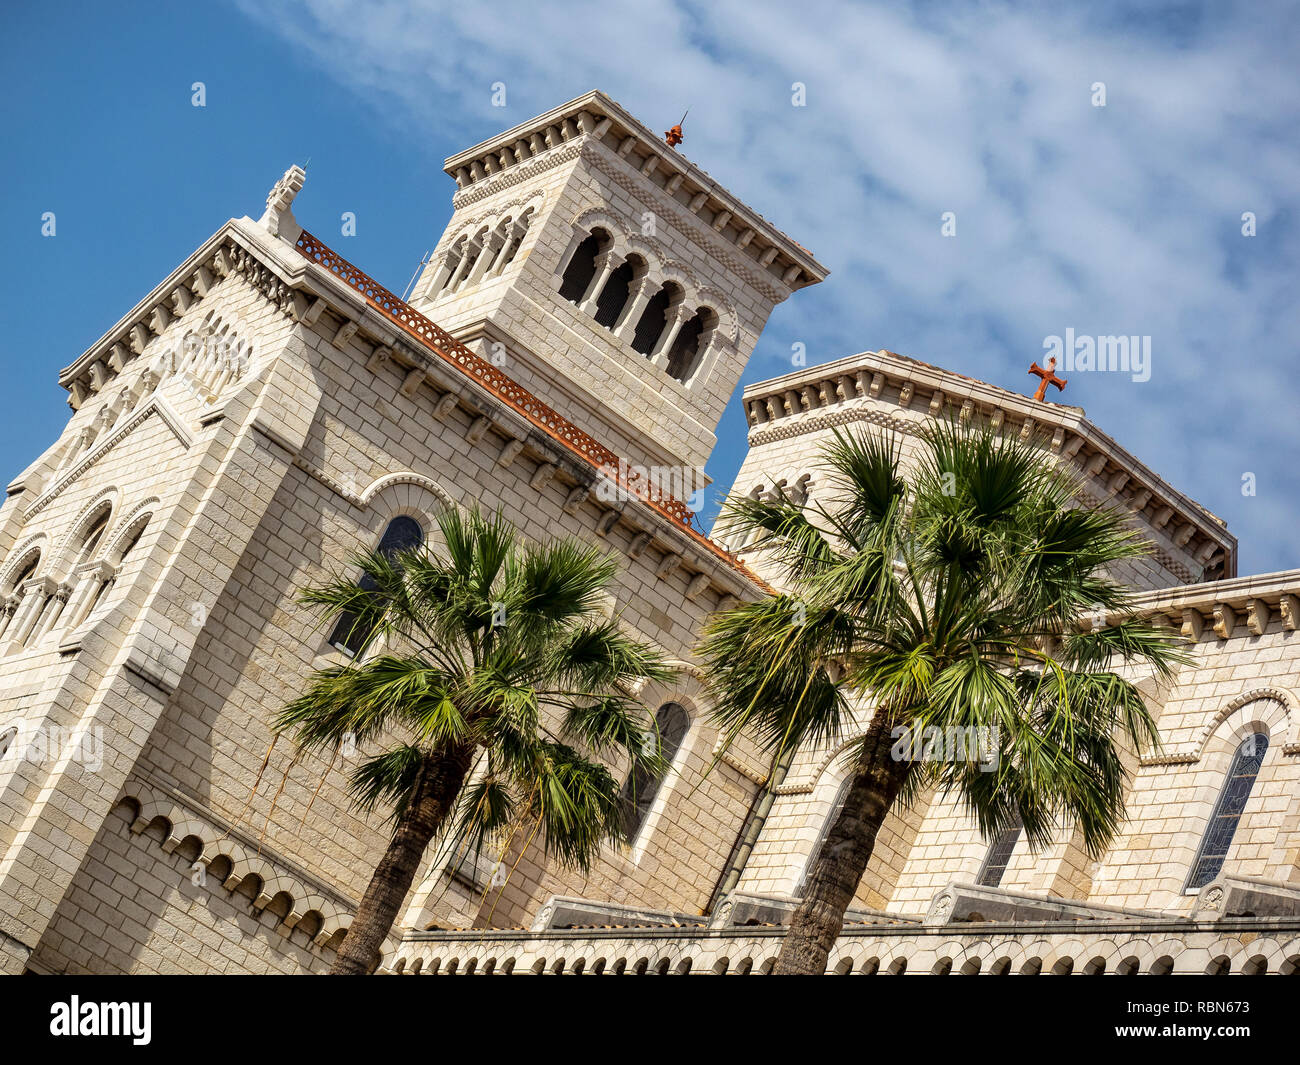 MONTE CARLO, MONACO:  Saint Nicholas Cathedral (also known as (The Cathedral of Our Lady Immaculate) Stock Photo